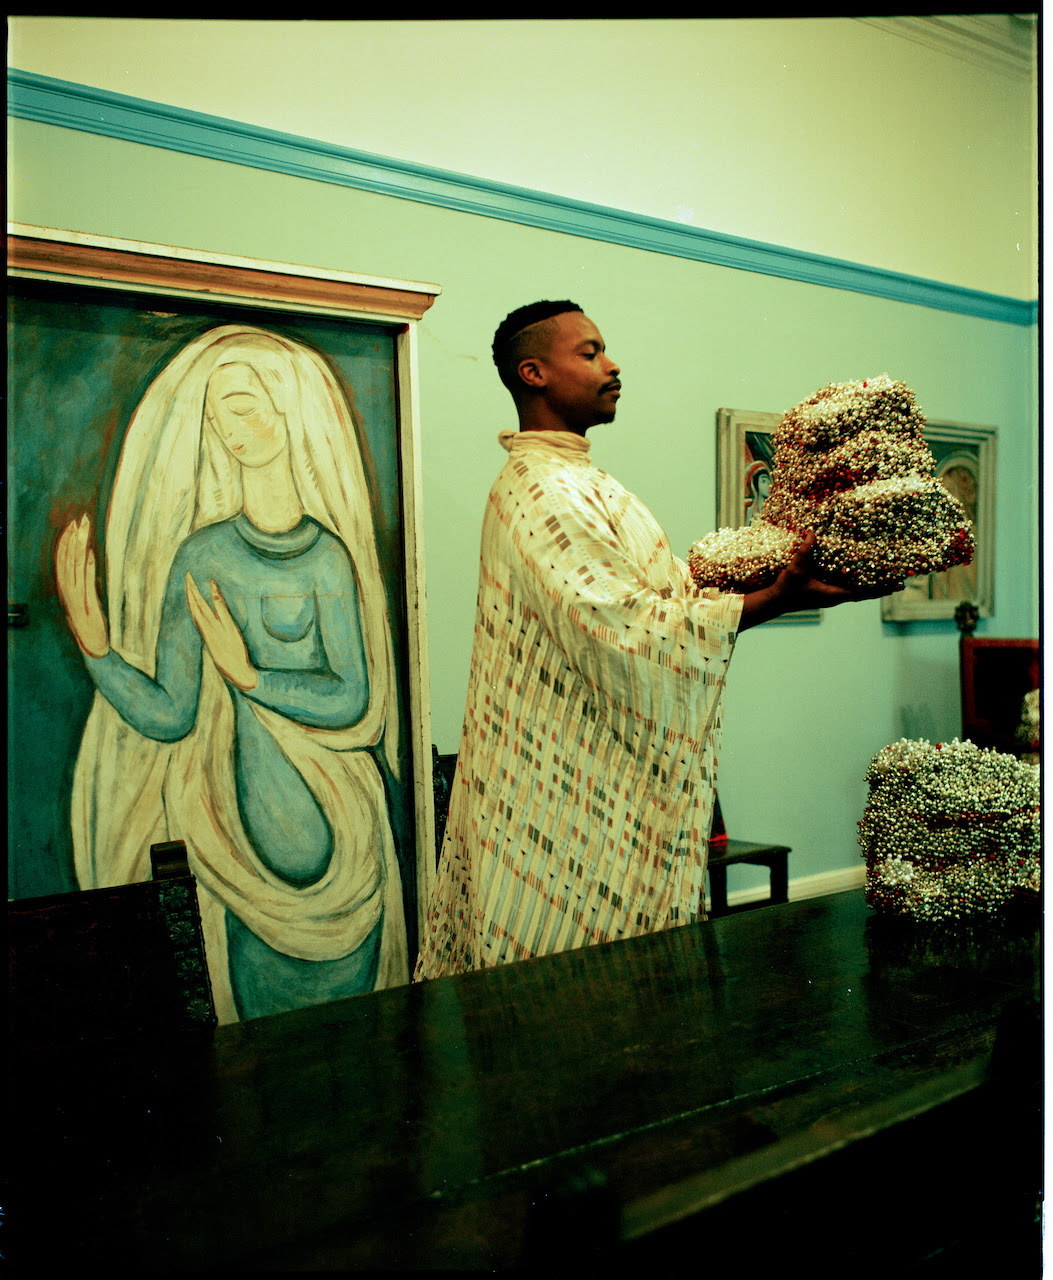 Portrait of Athi-Patra Ruga at the Irma Stern Museum (Portraits by Luke Doman)